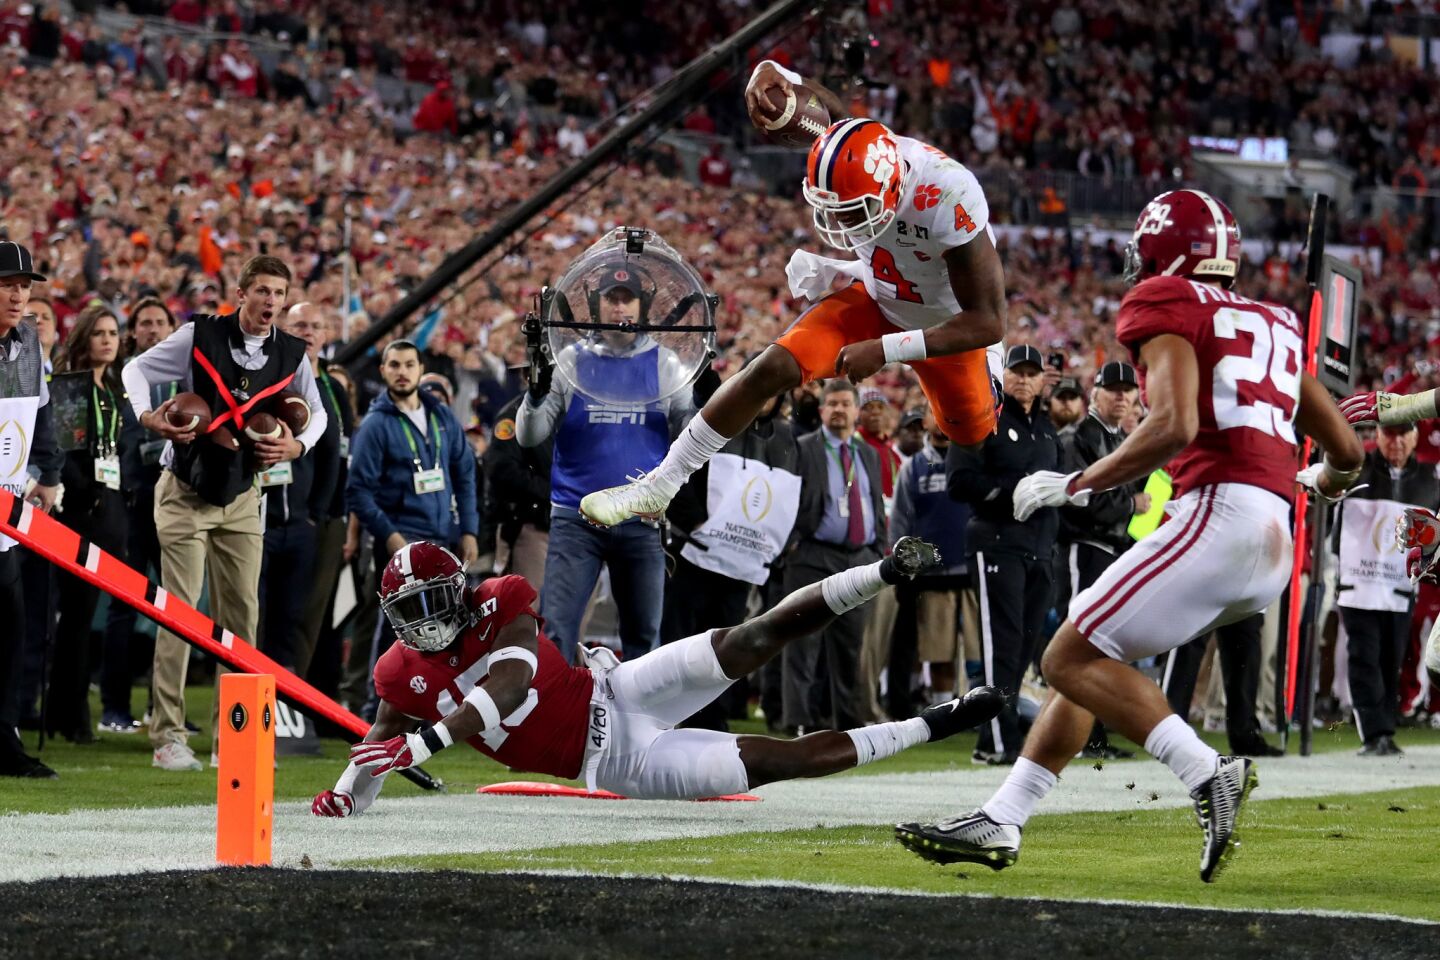 Clemson quarterback Deshaun Watson leaps over Alabama defensive back Ronnie Harrison to get to the one-yard line during the fourth quarter.